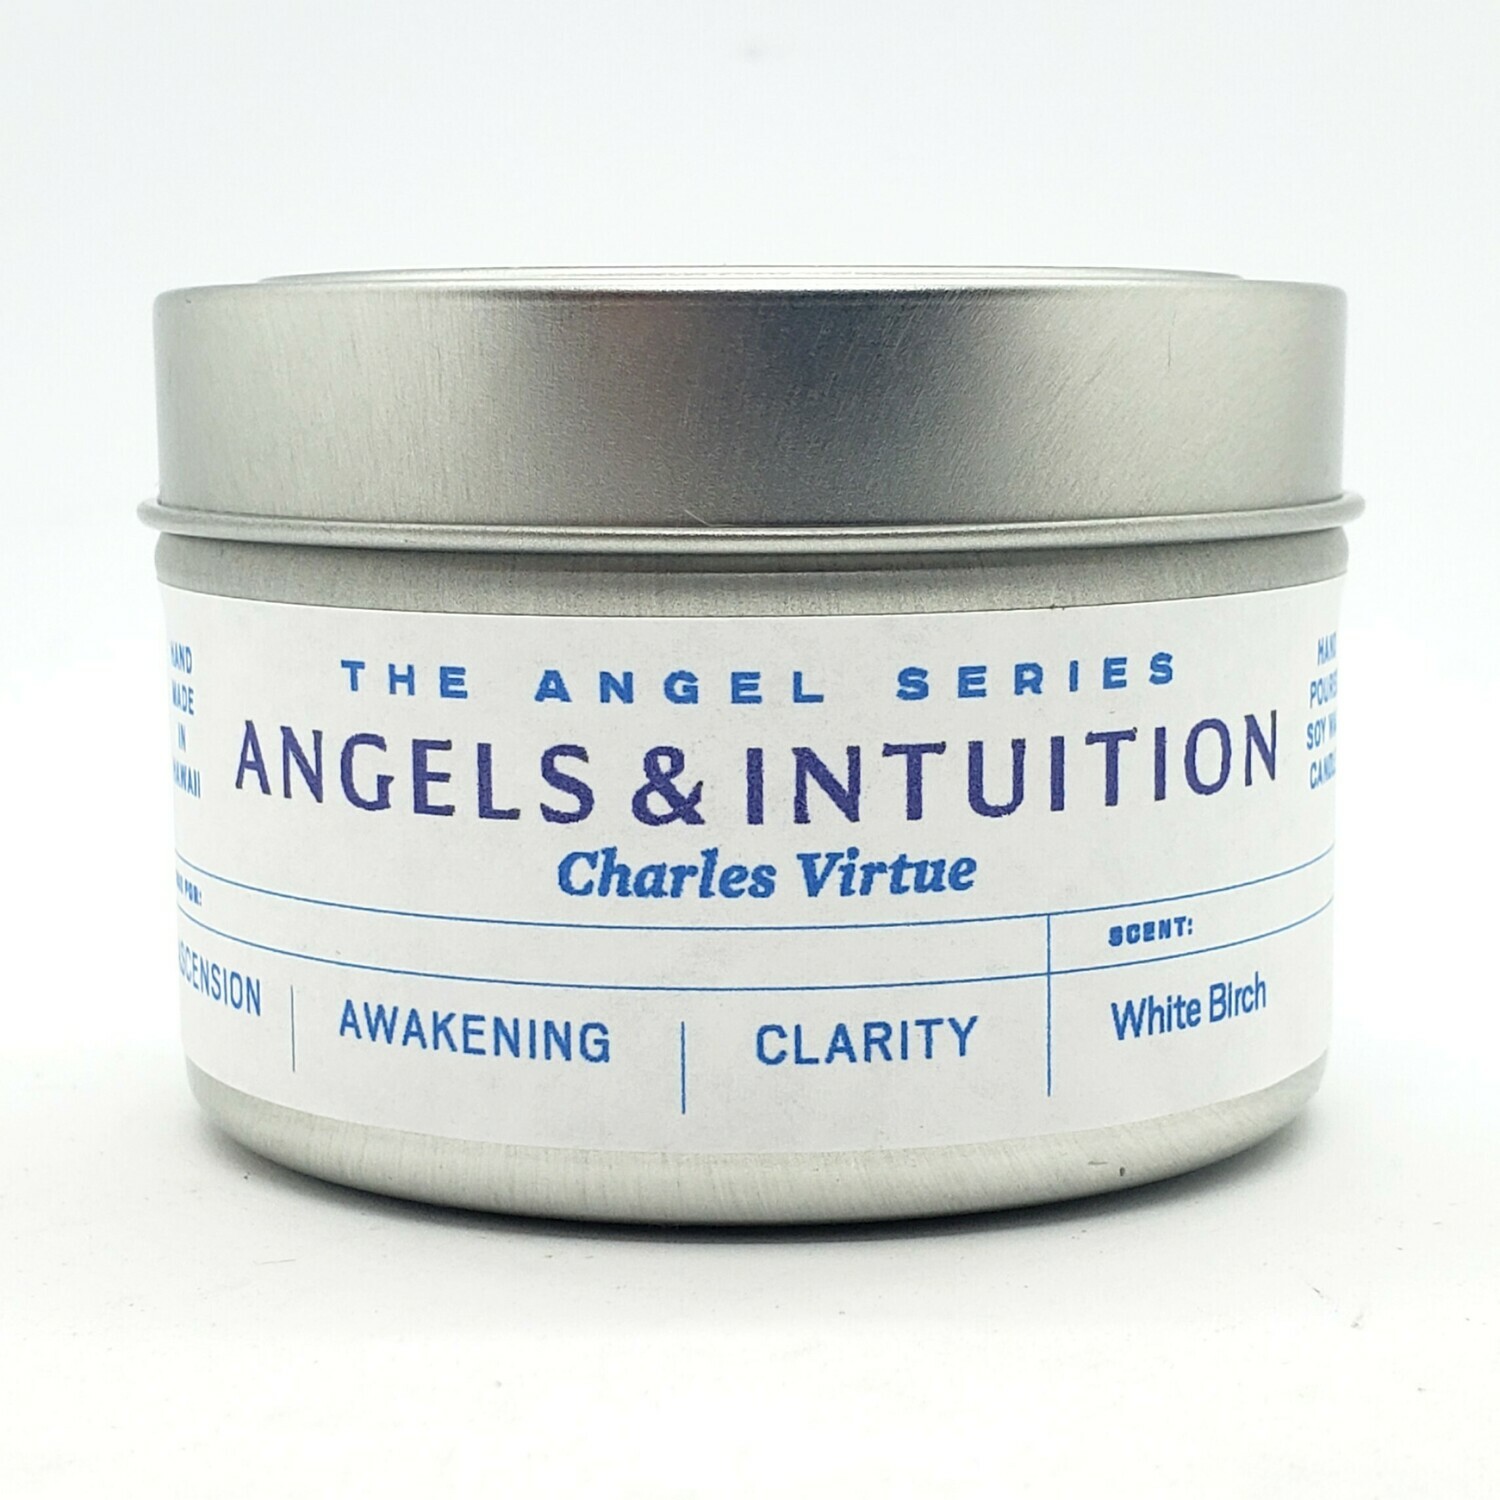 Angels and Intuition by Charles Virtue Intention candle